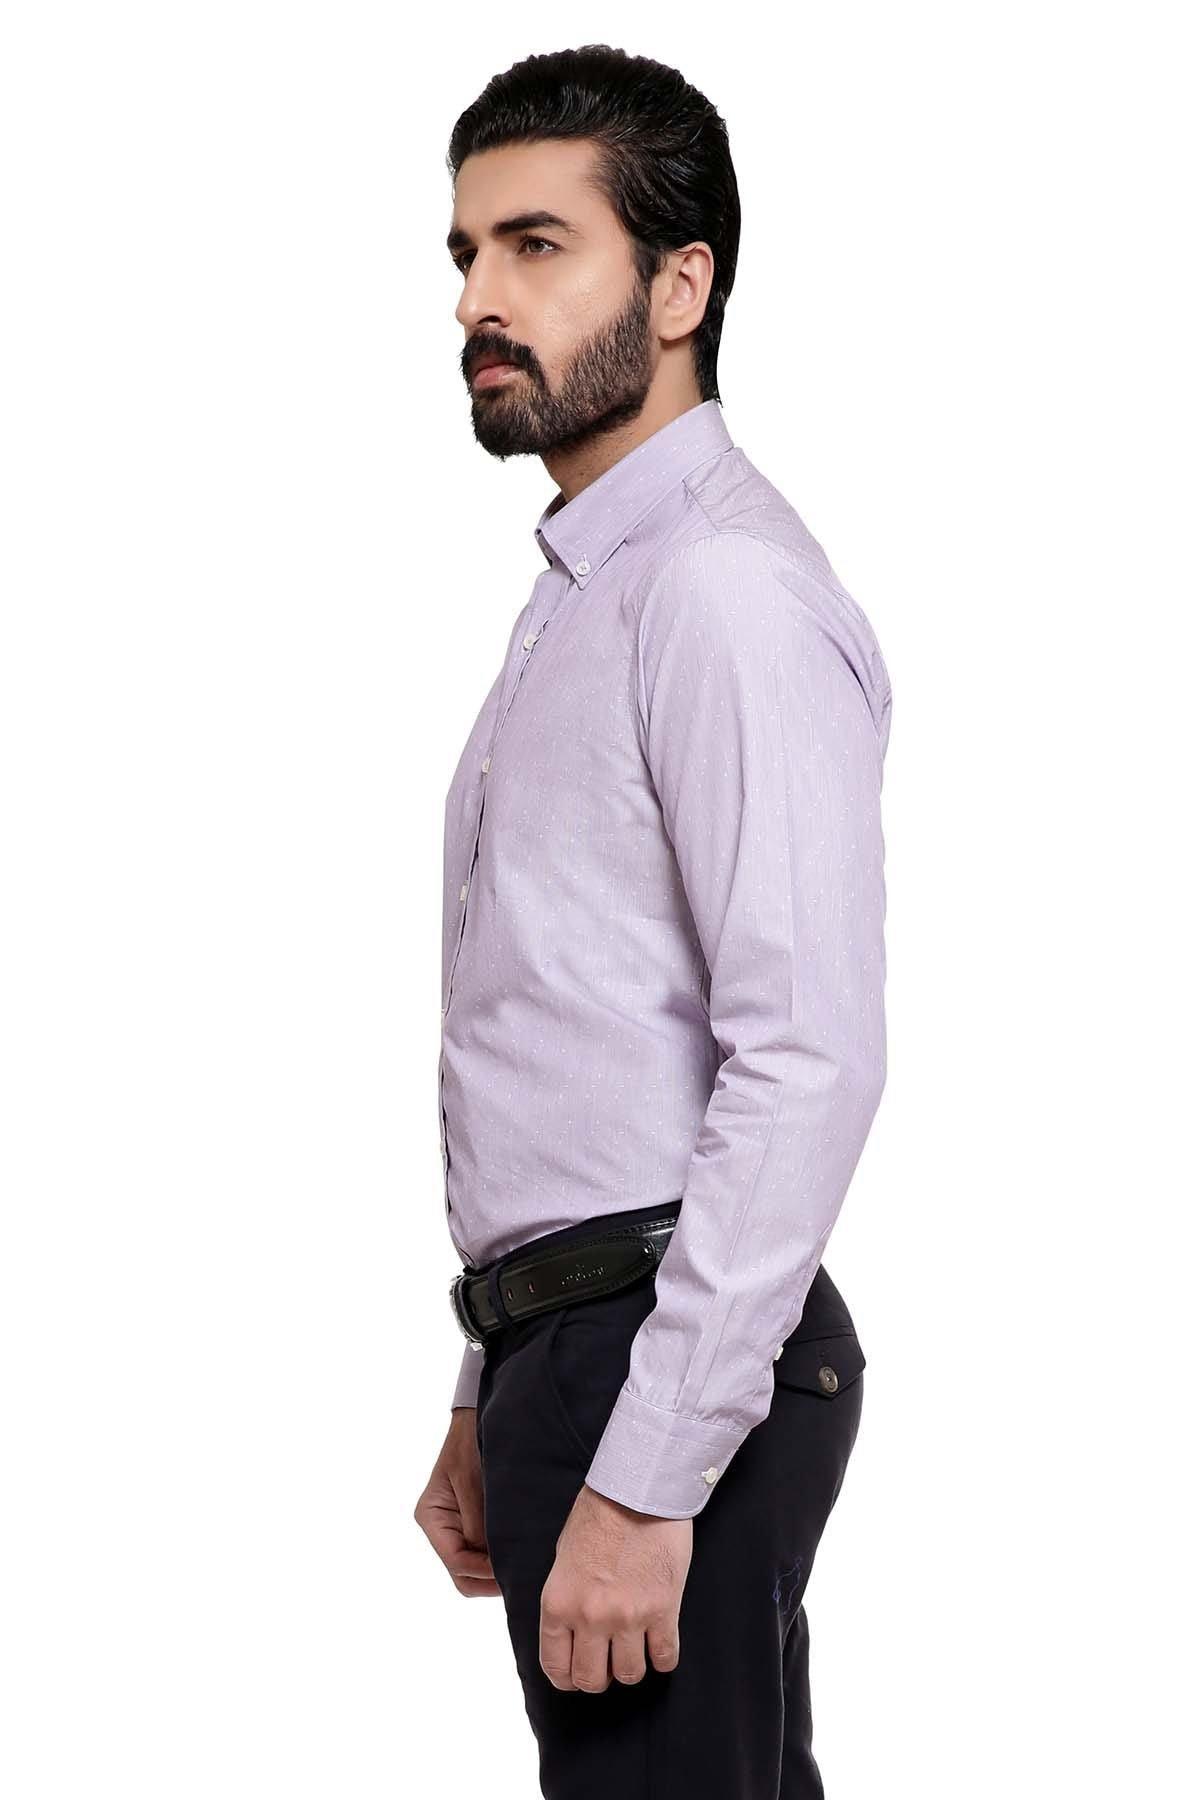 SMART SHIRT BUTTON DOWN FULL SLEEVE LIGHT PURPLE at Charcoal Clothing